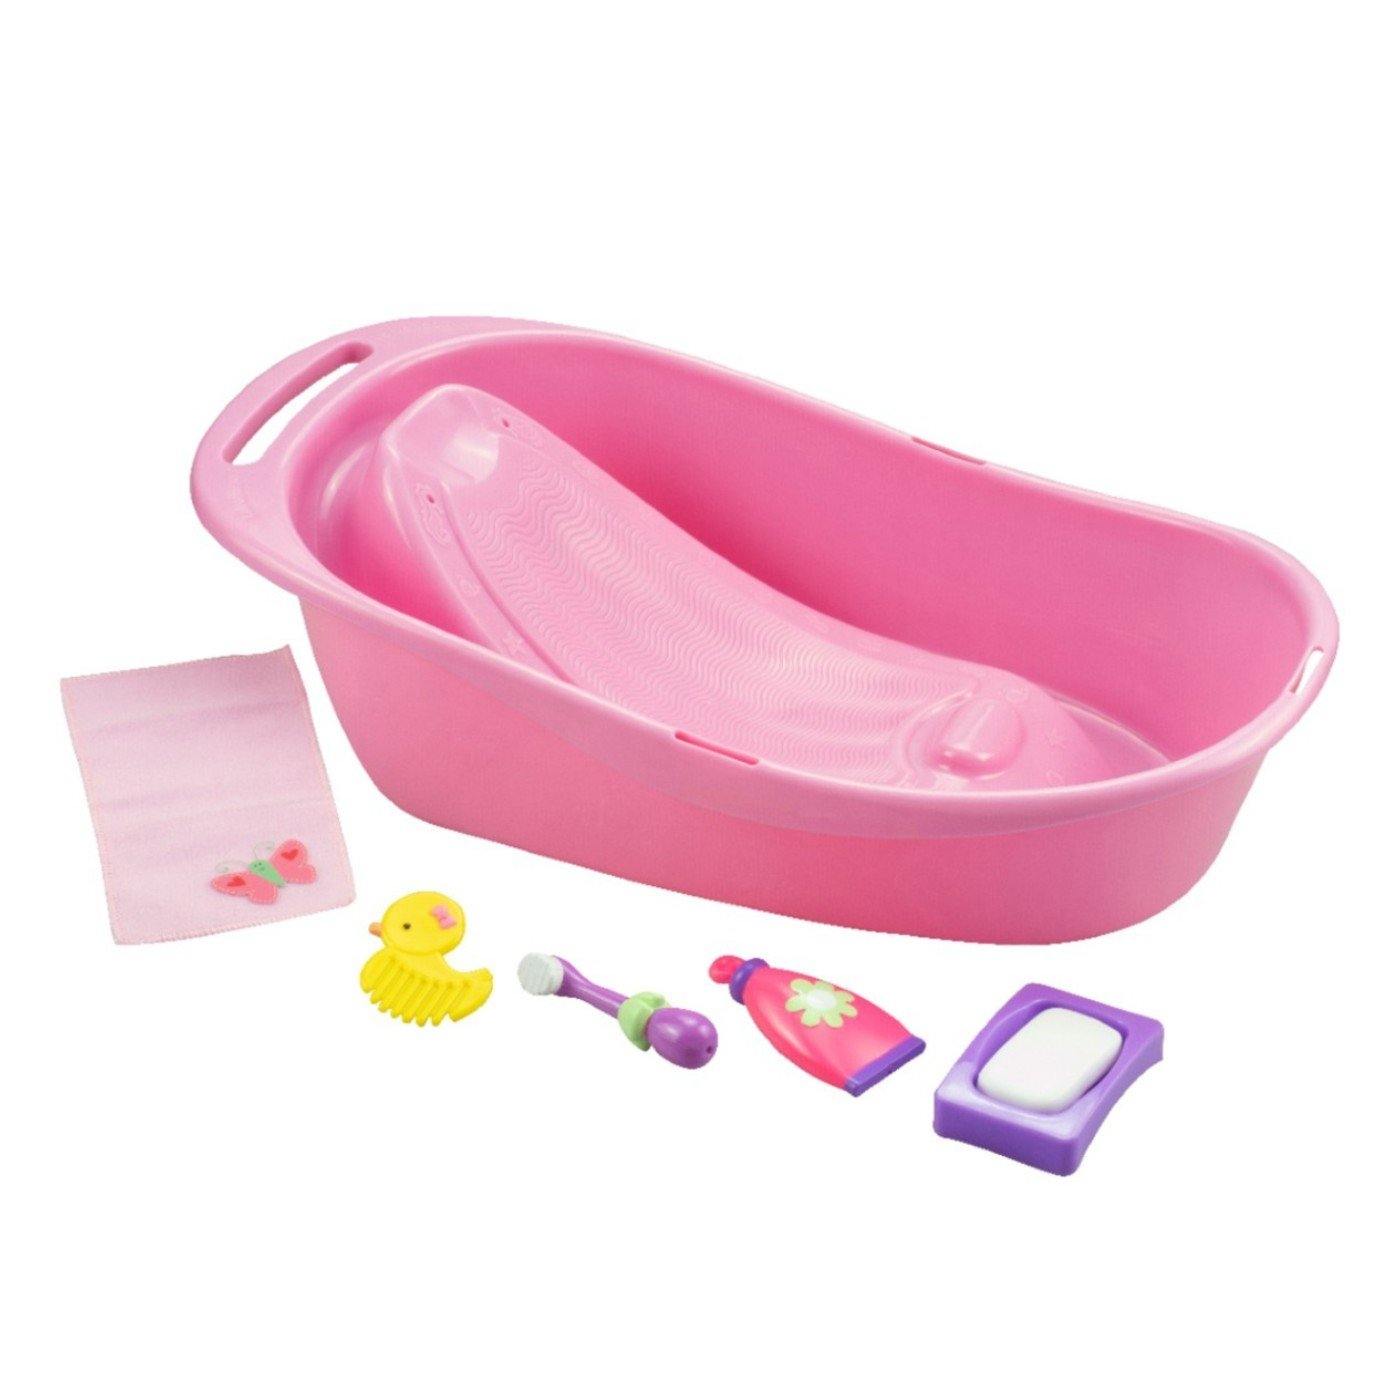 For Keeps! Pink Baby Doll Bath Gift Set Fits Most Dolls up to 16” - Ages 2+ - JC Toys Group Inc.